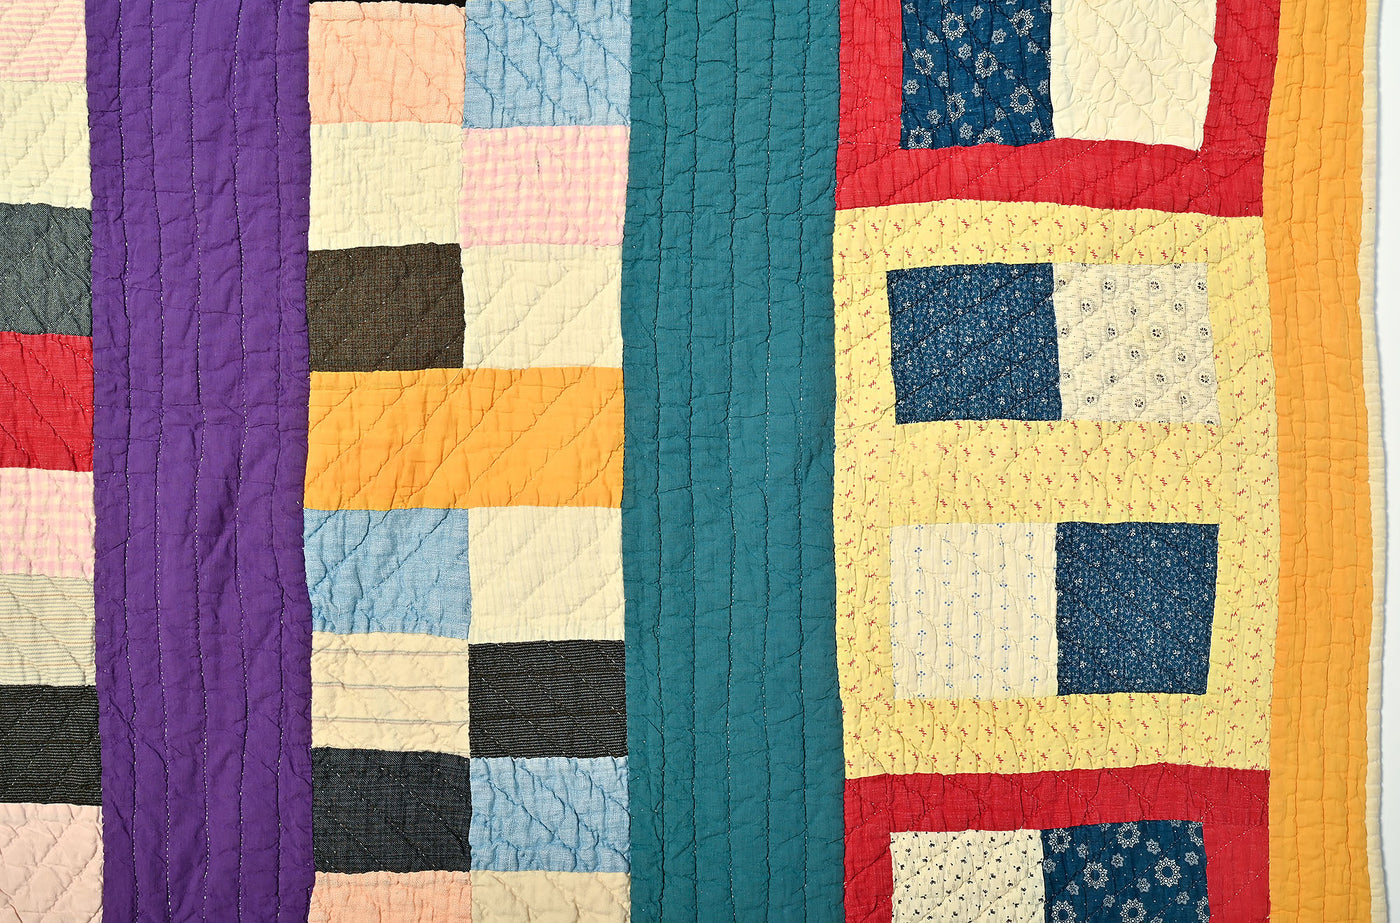 Four Patch and Bars Quilt